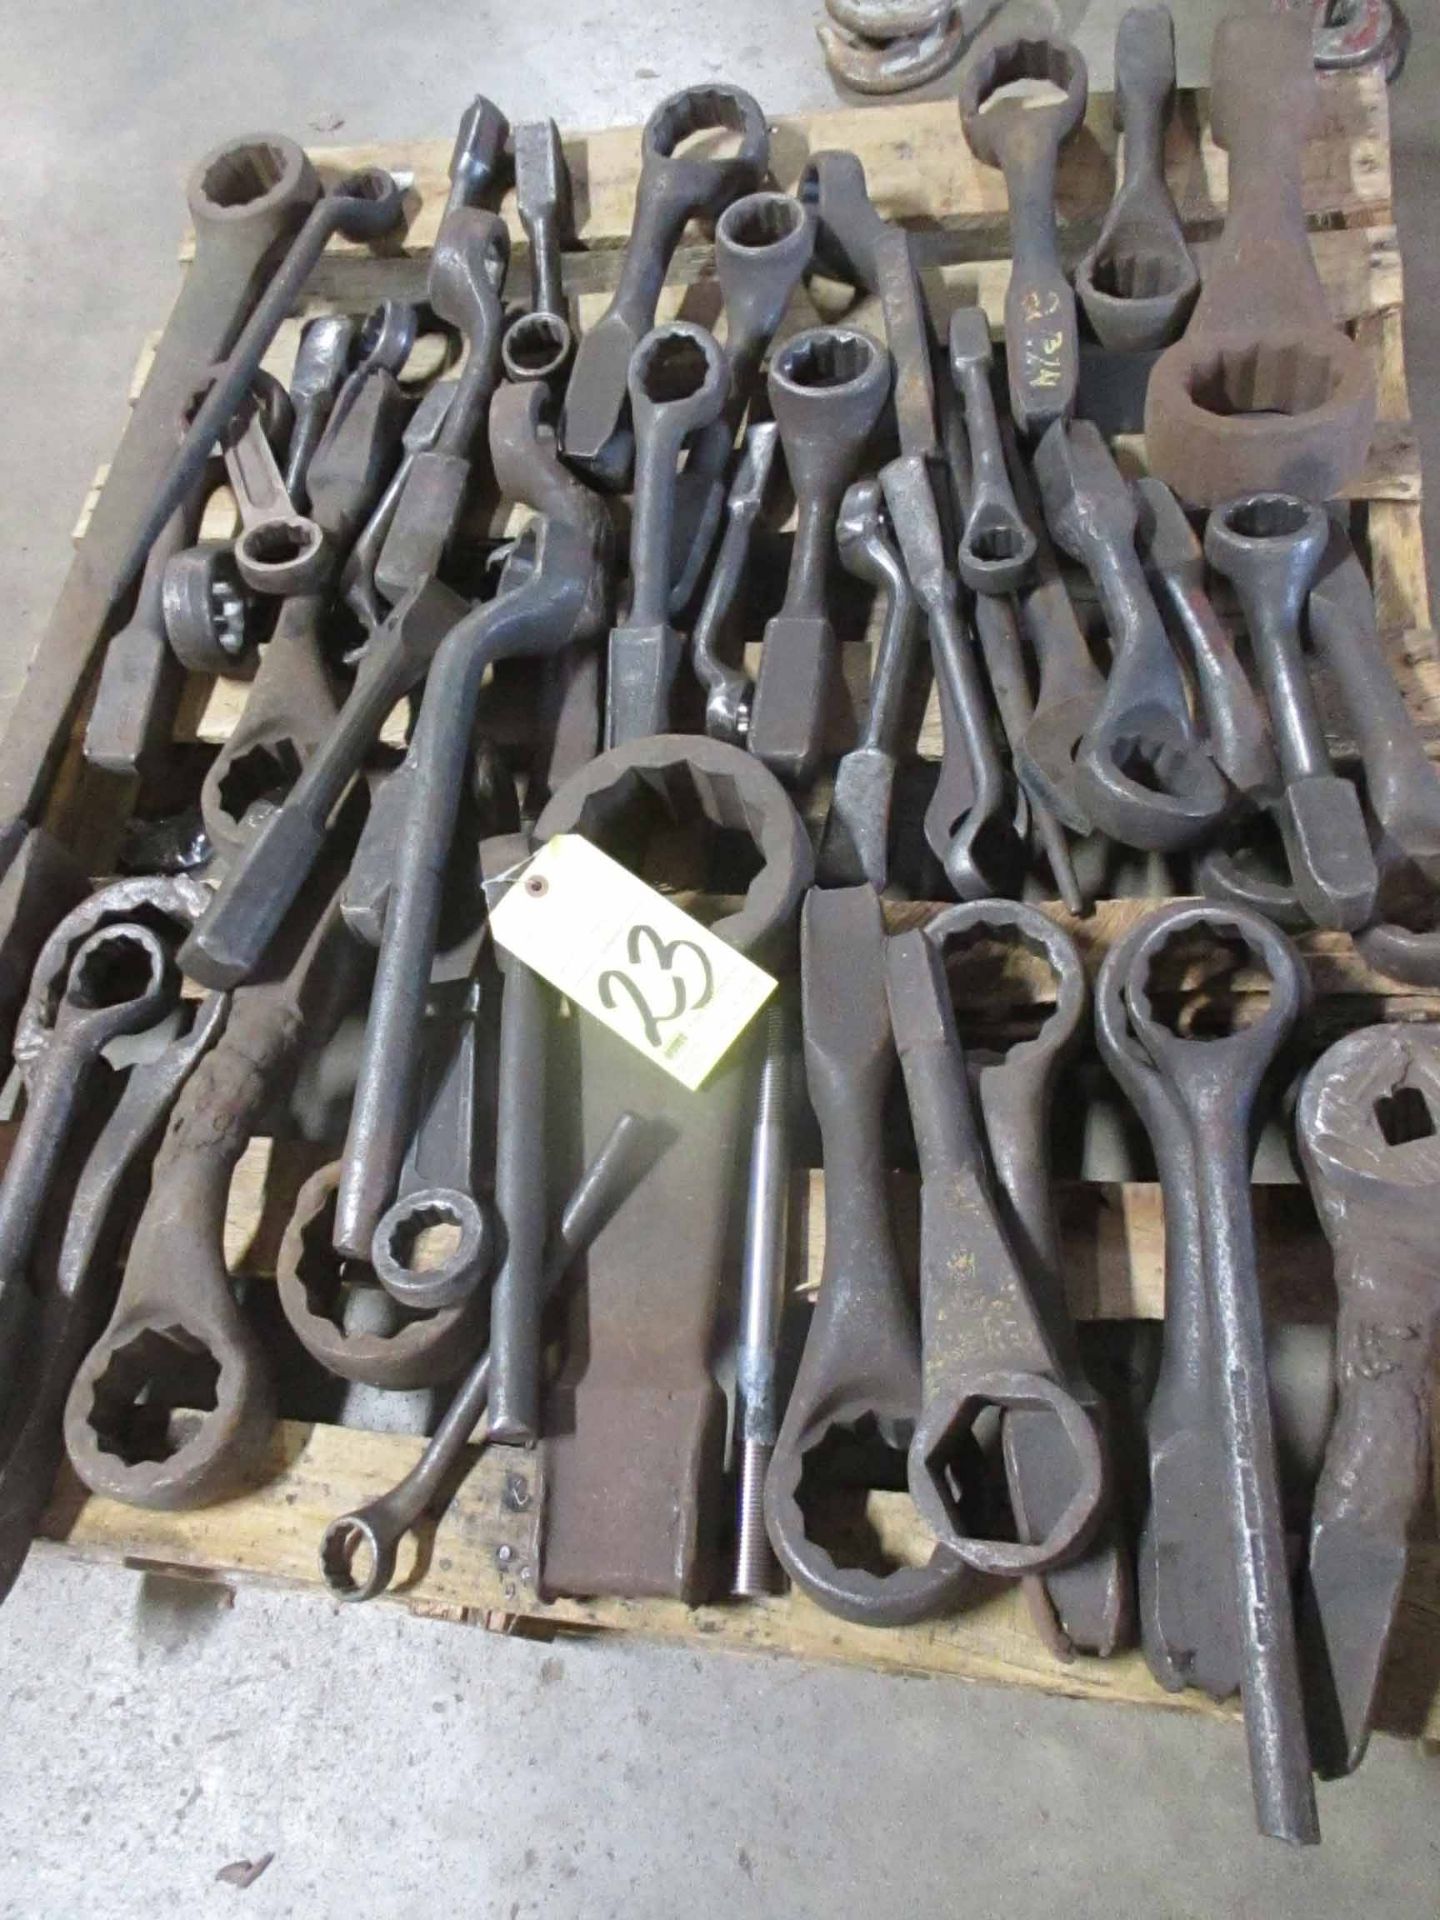 LOT OF HAMMER WRENCHES, 2" to 6"